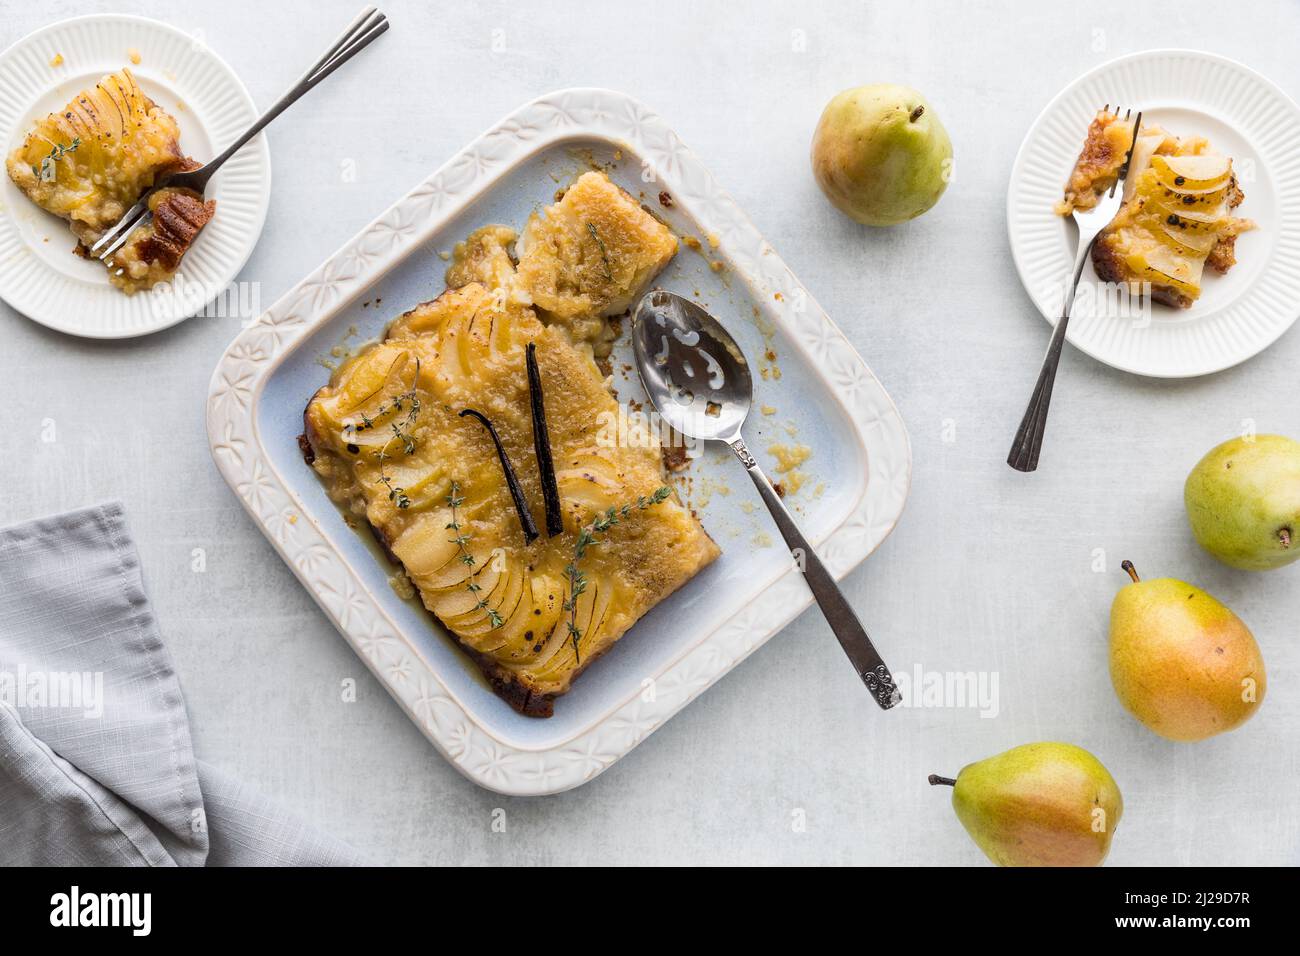 Delicious pear upside down cake garnished with vanilla pods and thyme. Stock Photo